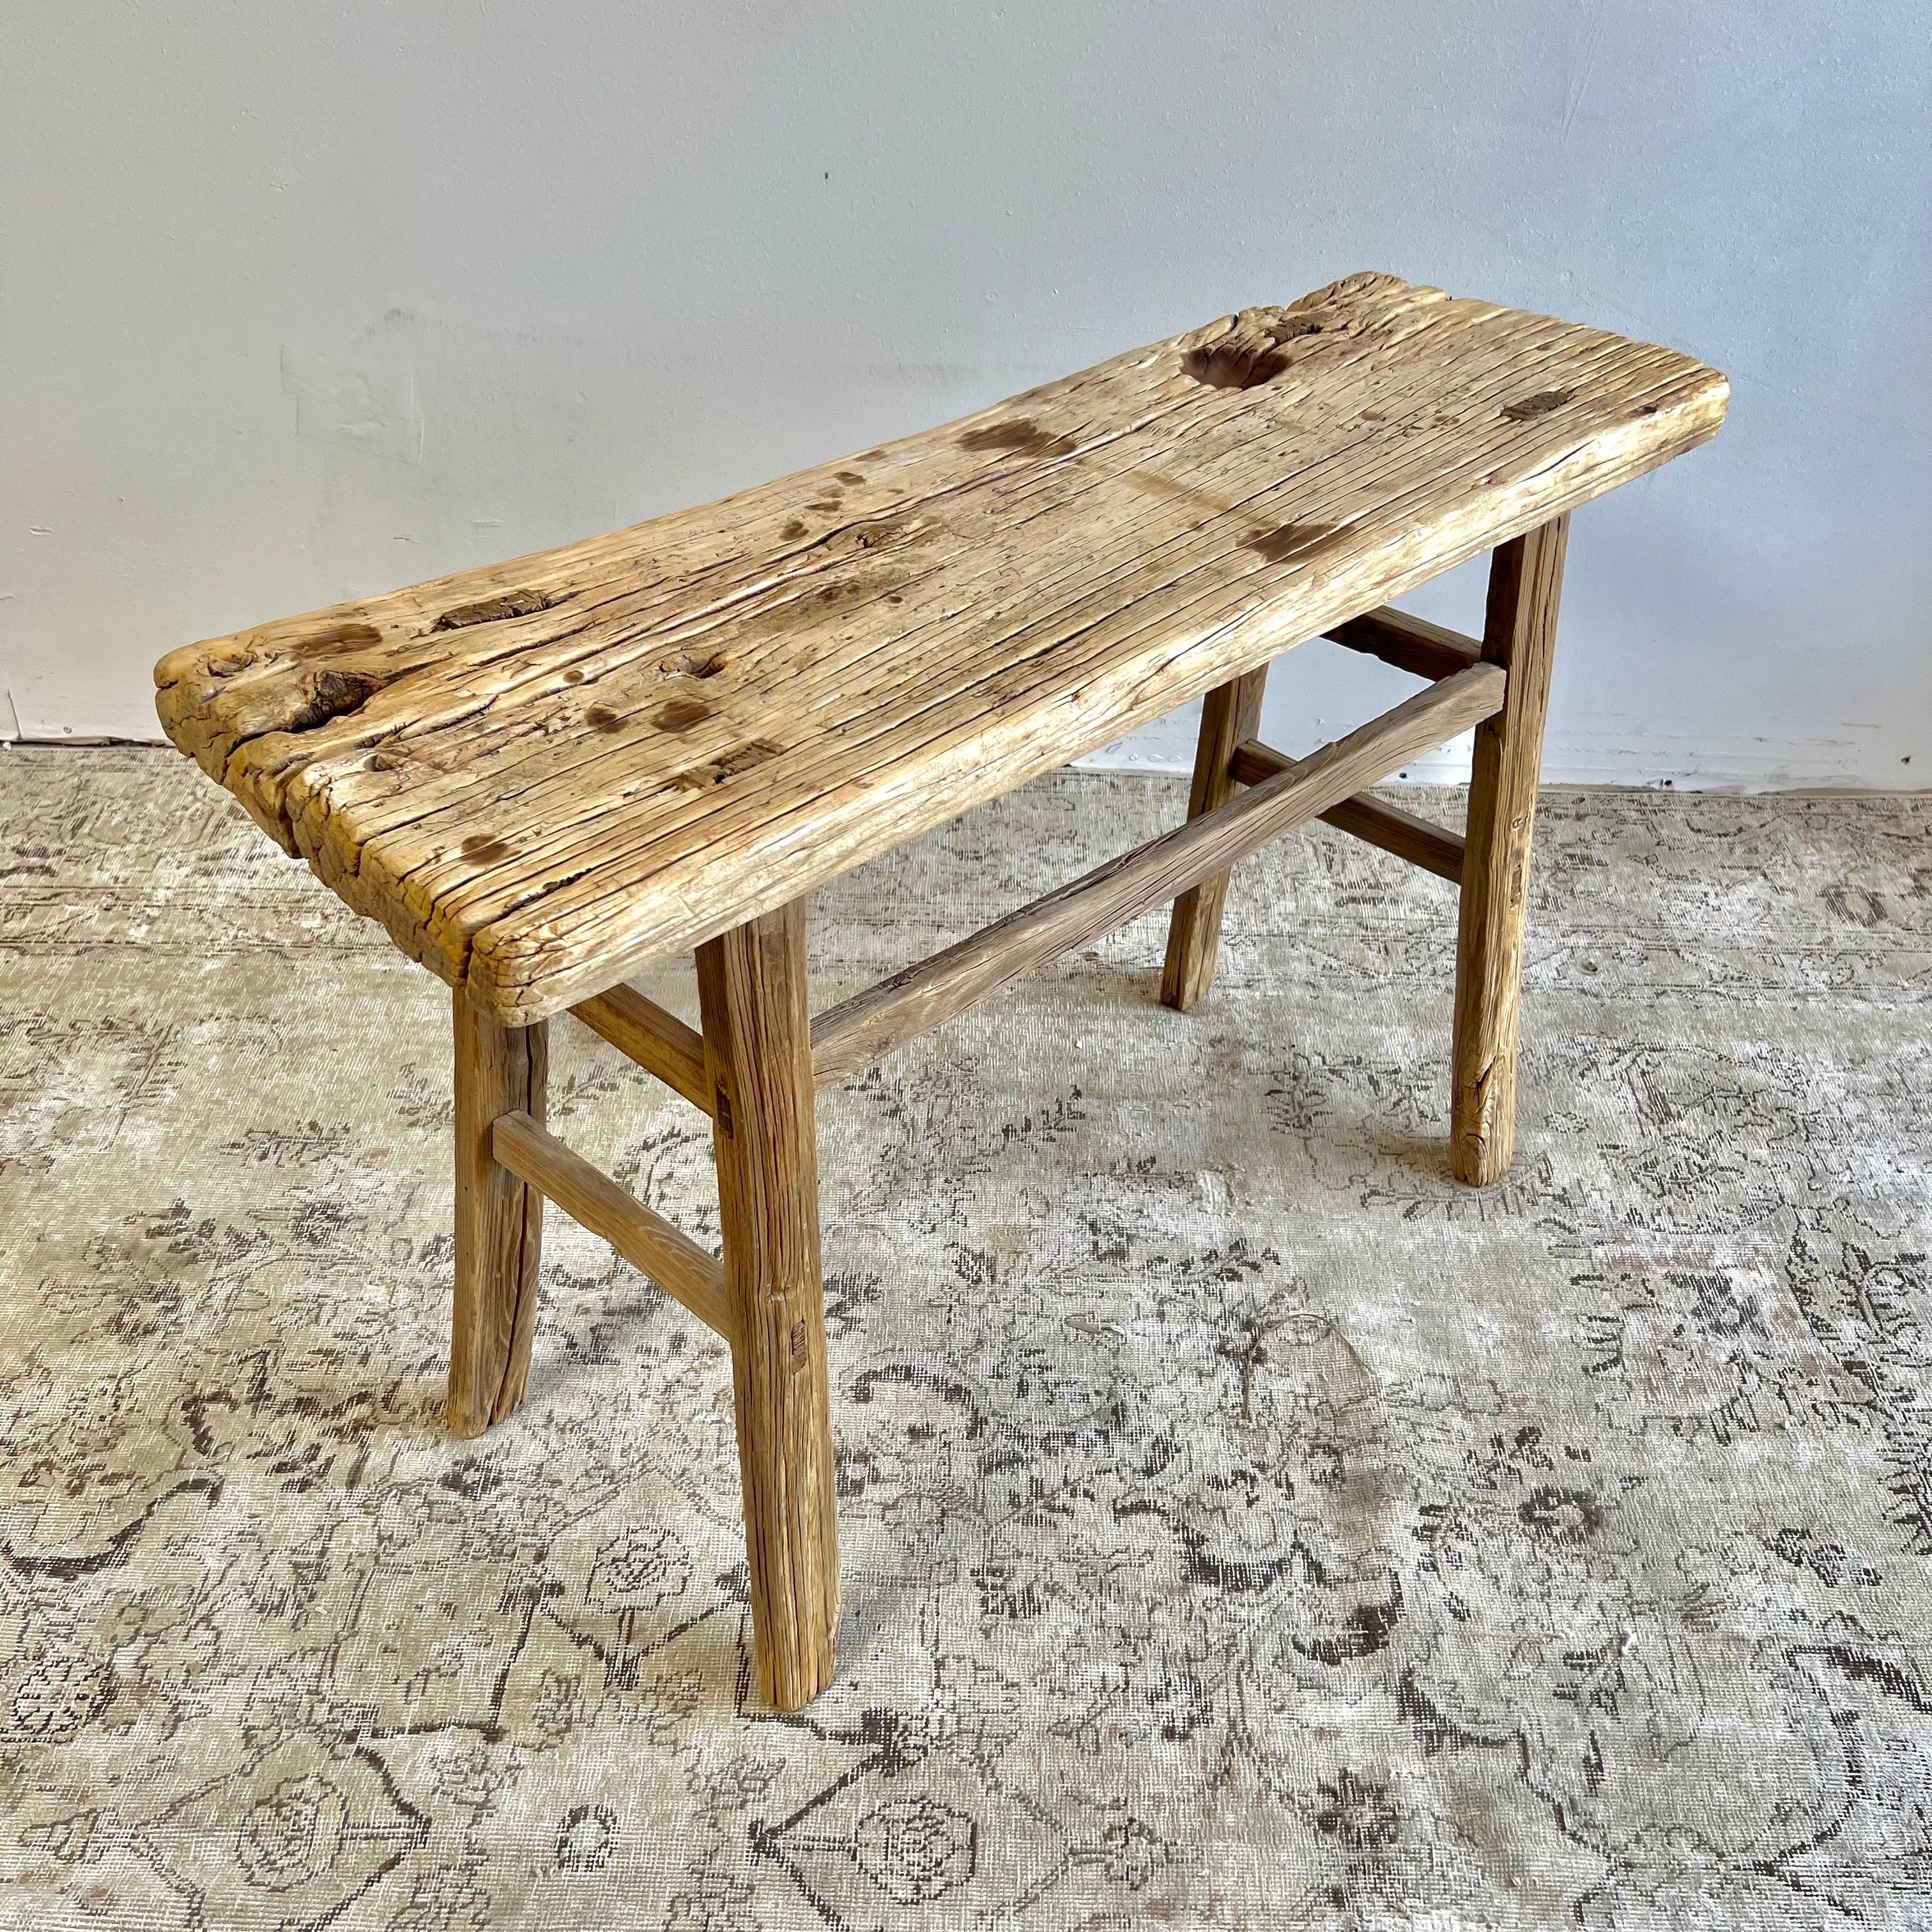 Vintage antique elm wood console table Beautiful antique patina, with weathering and age, these are solid and sturdy ready for daily use, use as a entry table, sofa table or console in a dining room. Great in a living room with baskets or ottomans